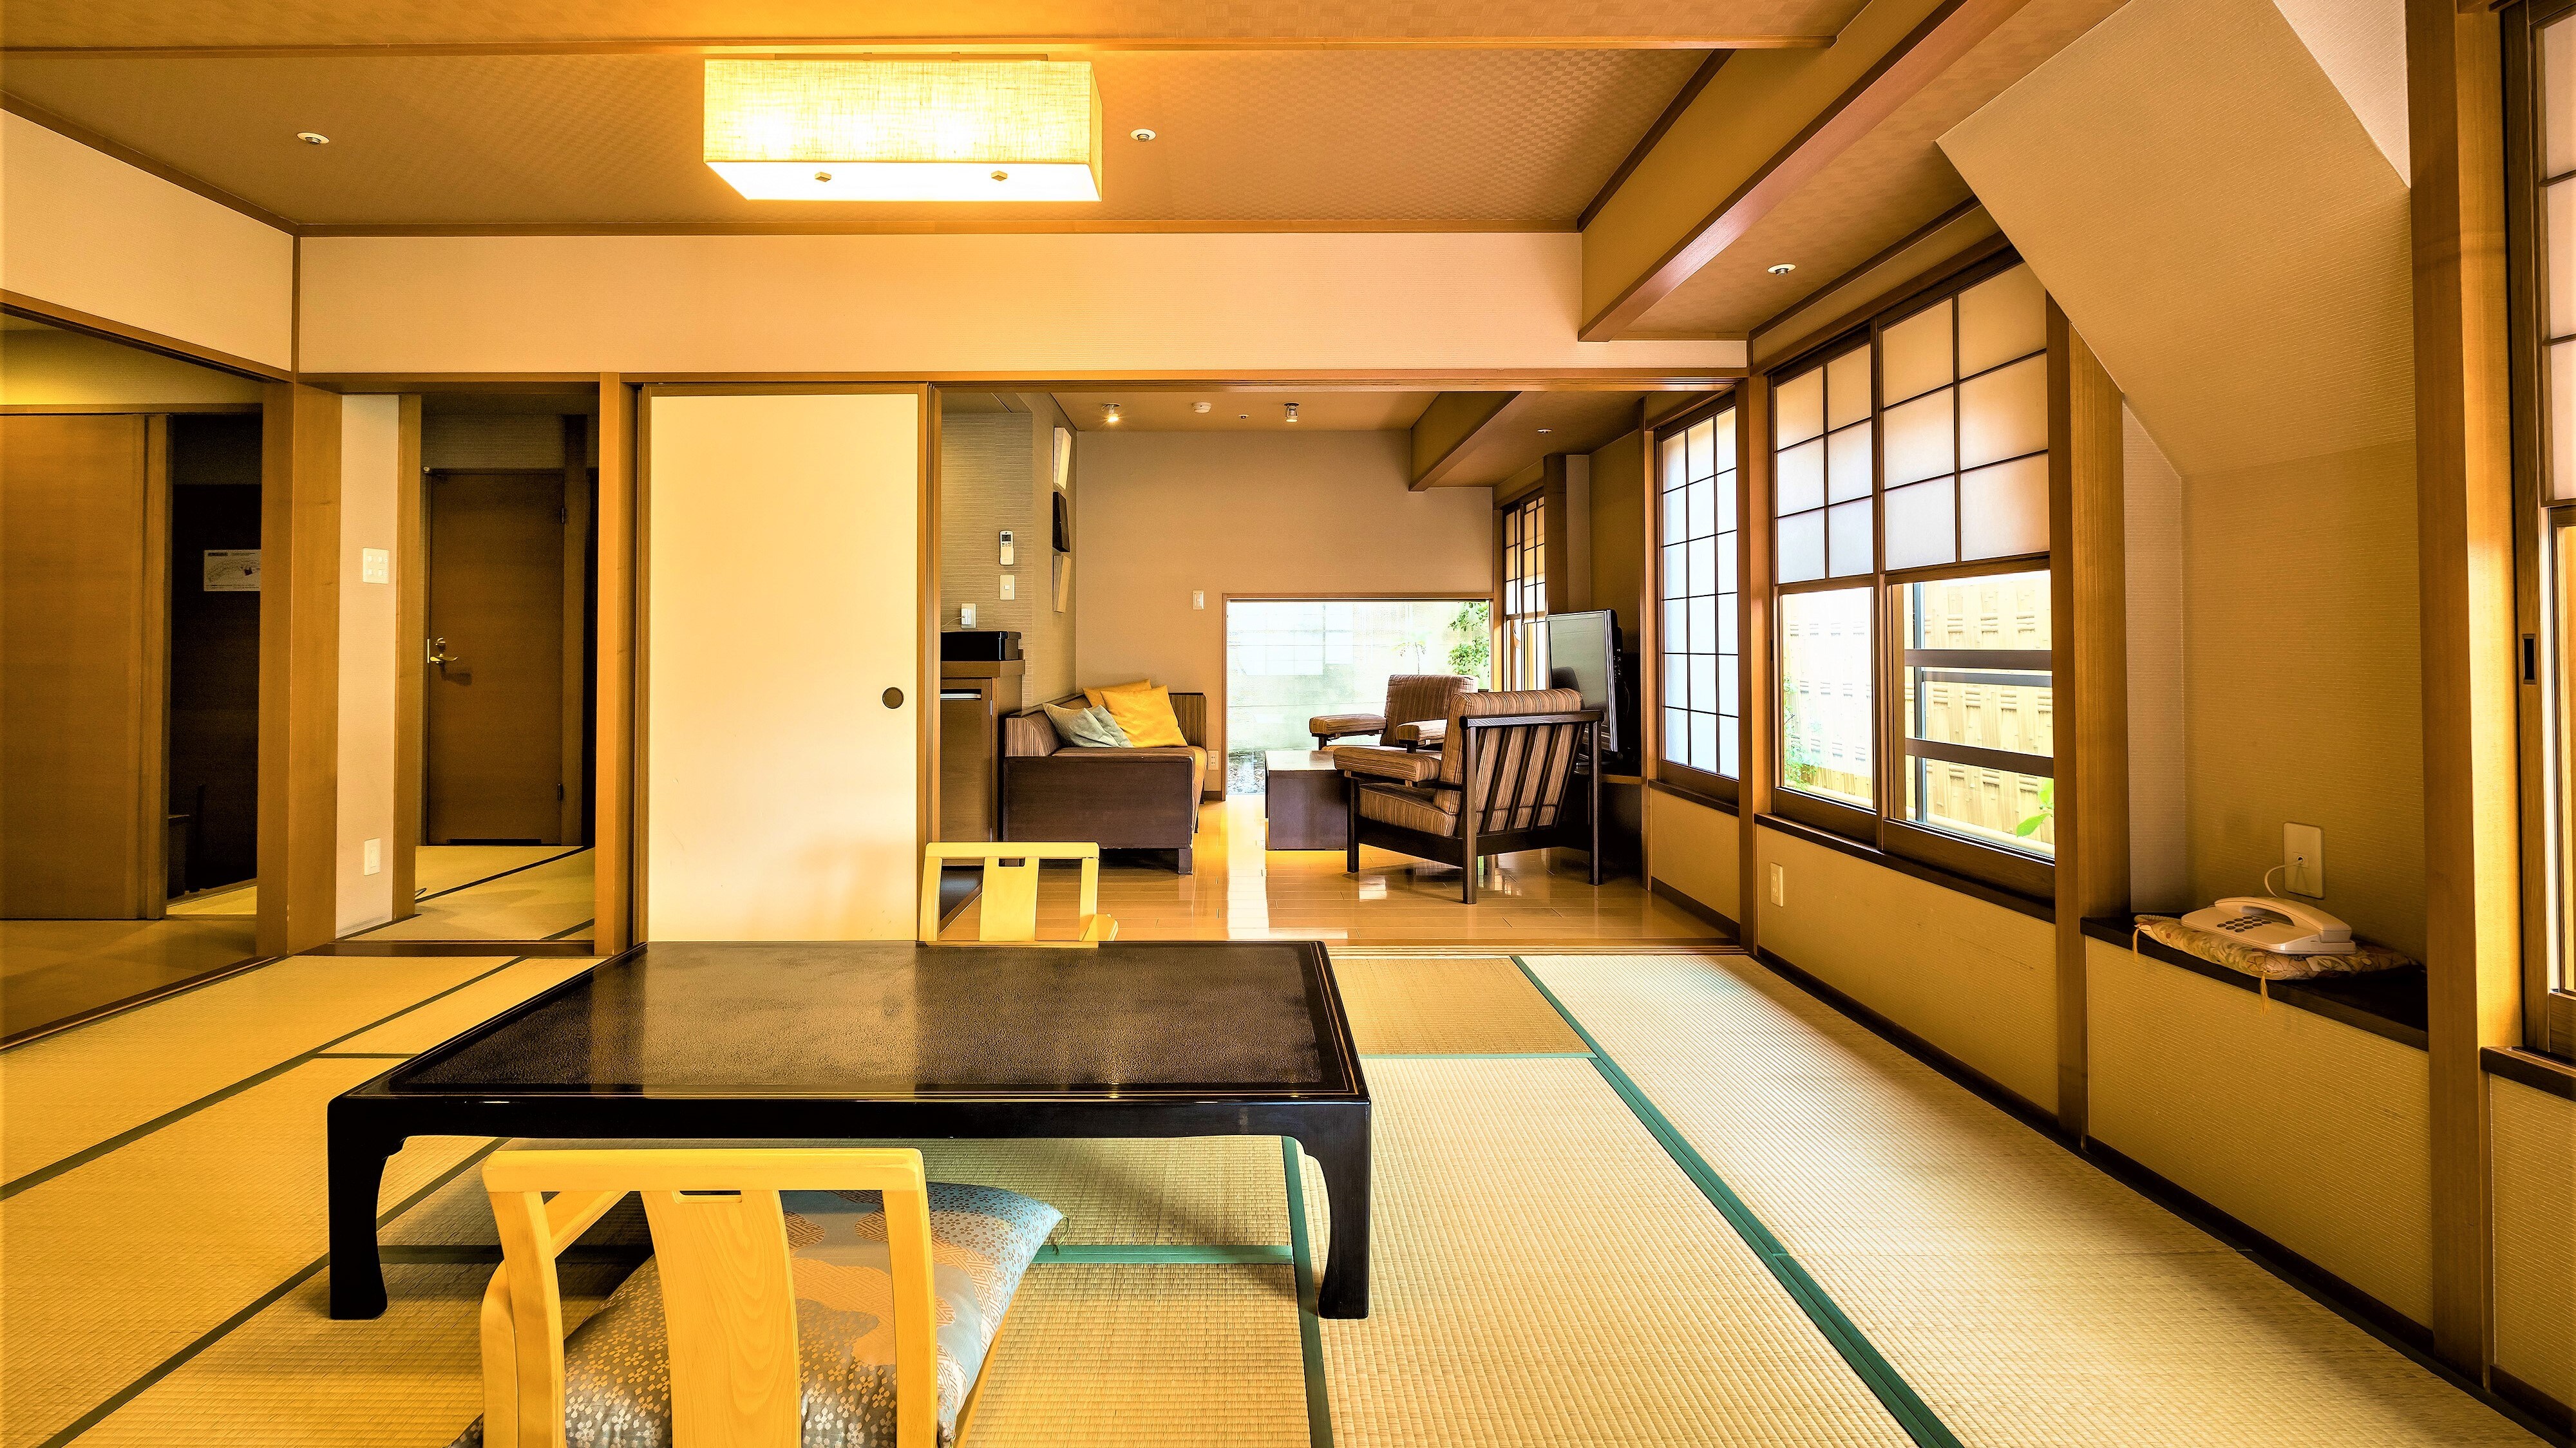 An example of a Japanese and Western room with an open-air bath on the river side